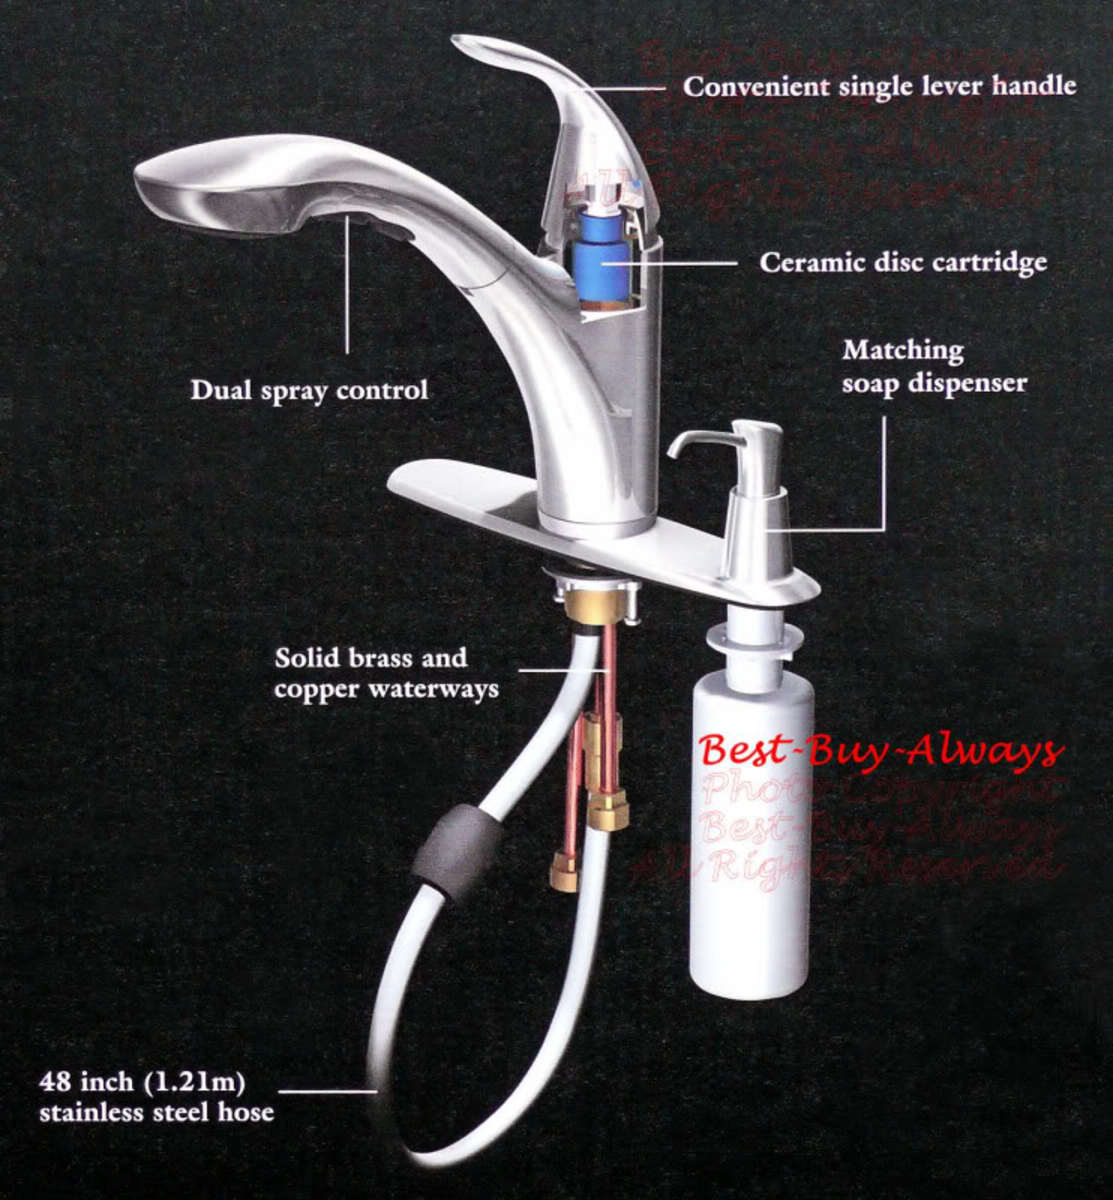 Schematic of a Typical Kitchen Faucet